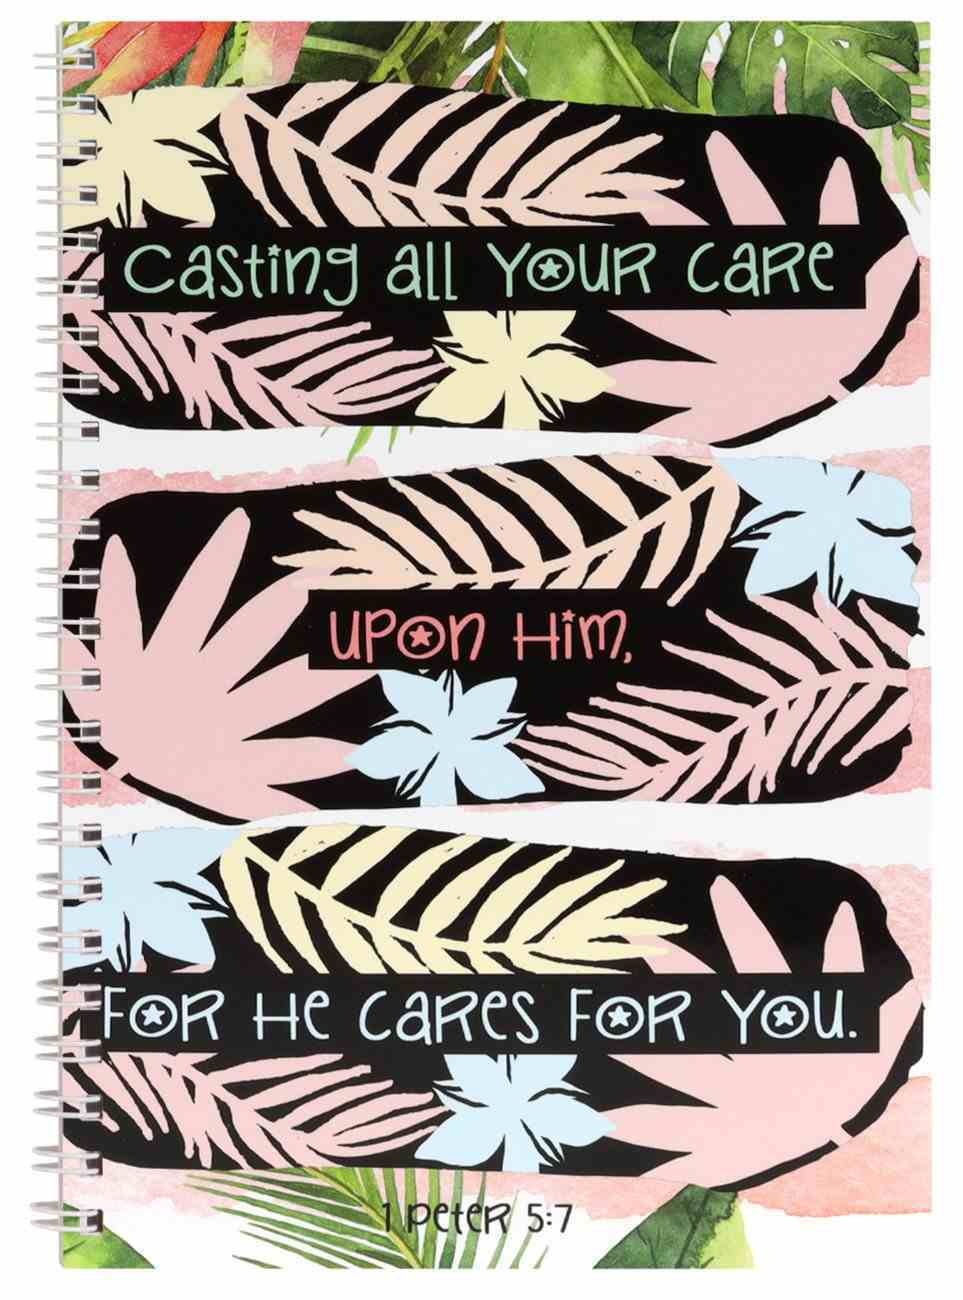 Spiral Bound Softcover Journal: Casting All Your Care Upon Him, For He Cares For You Spiral